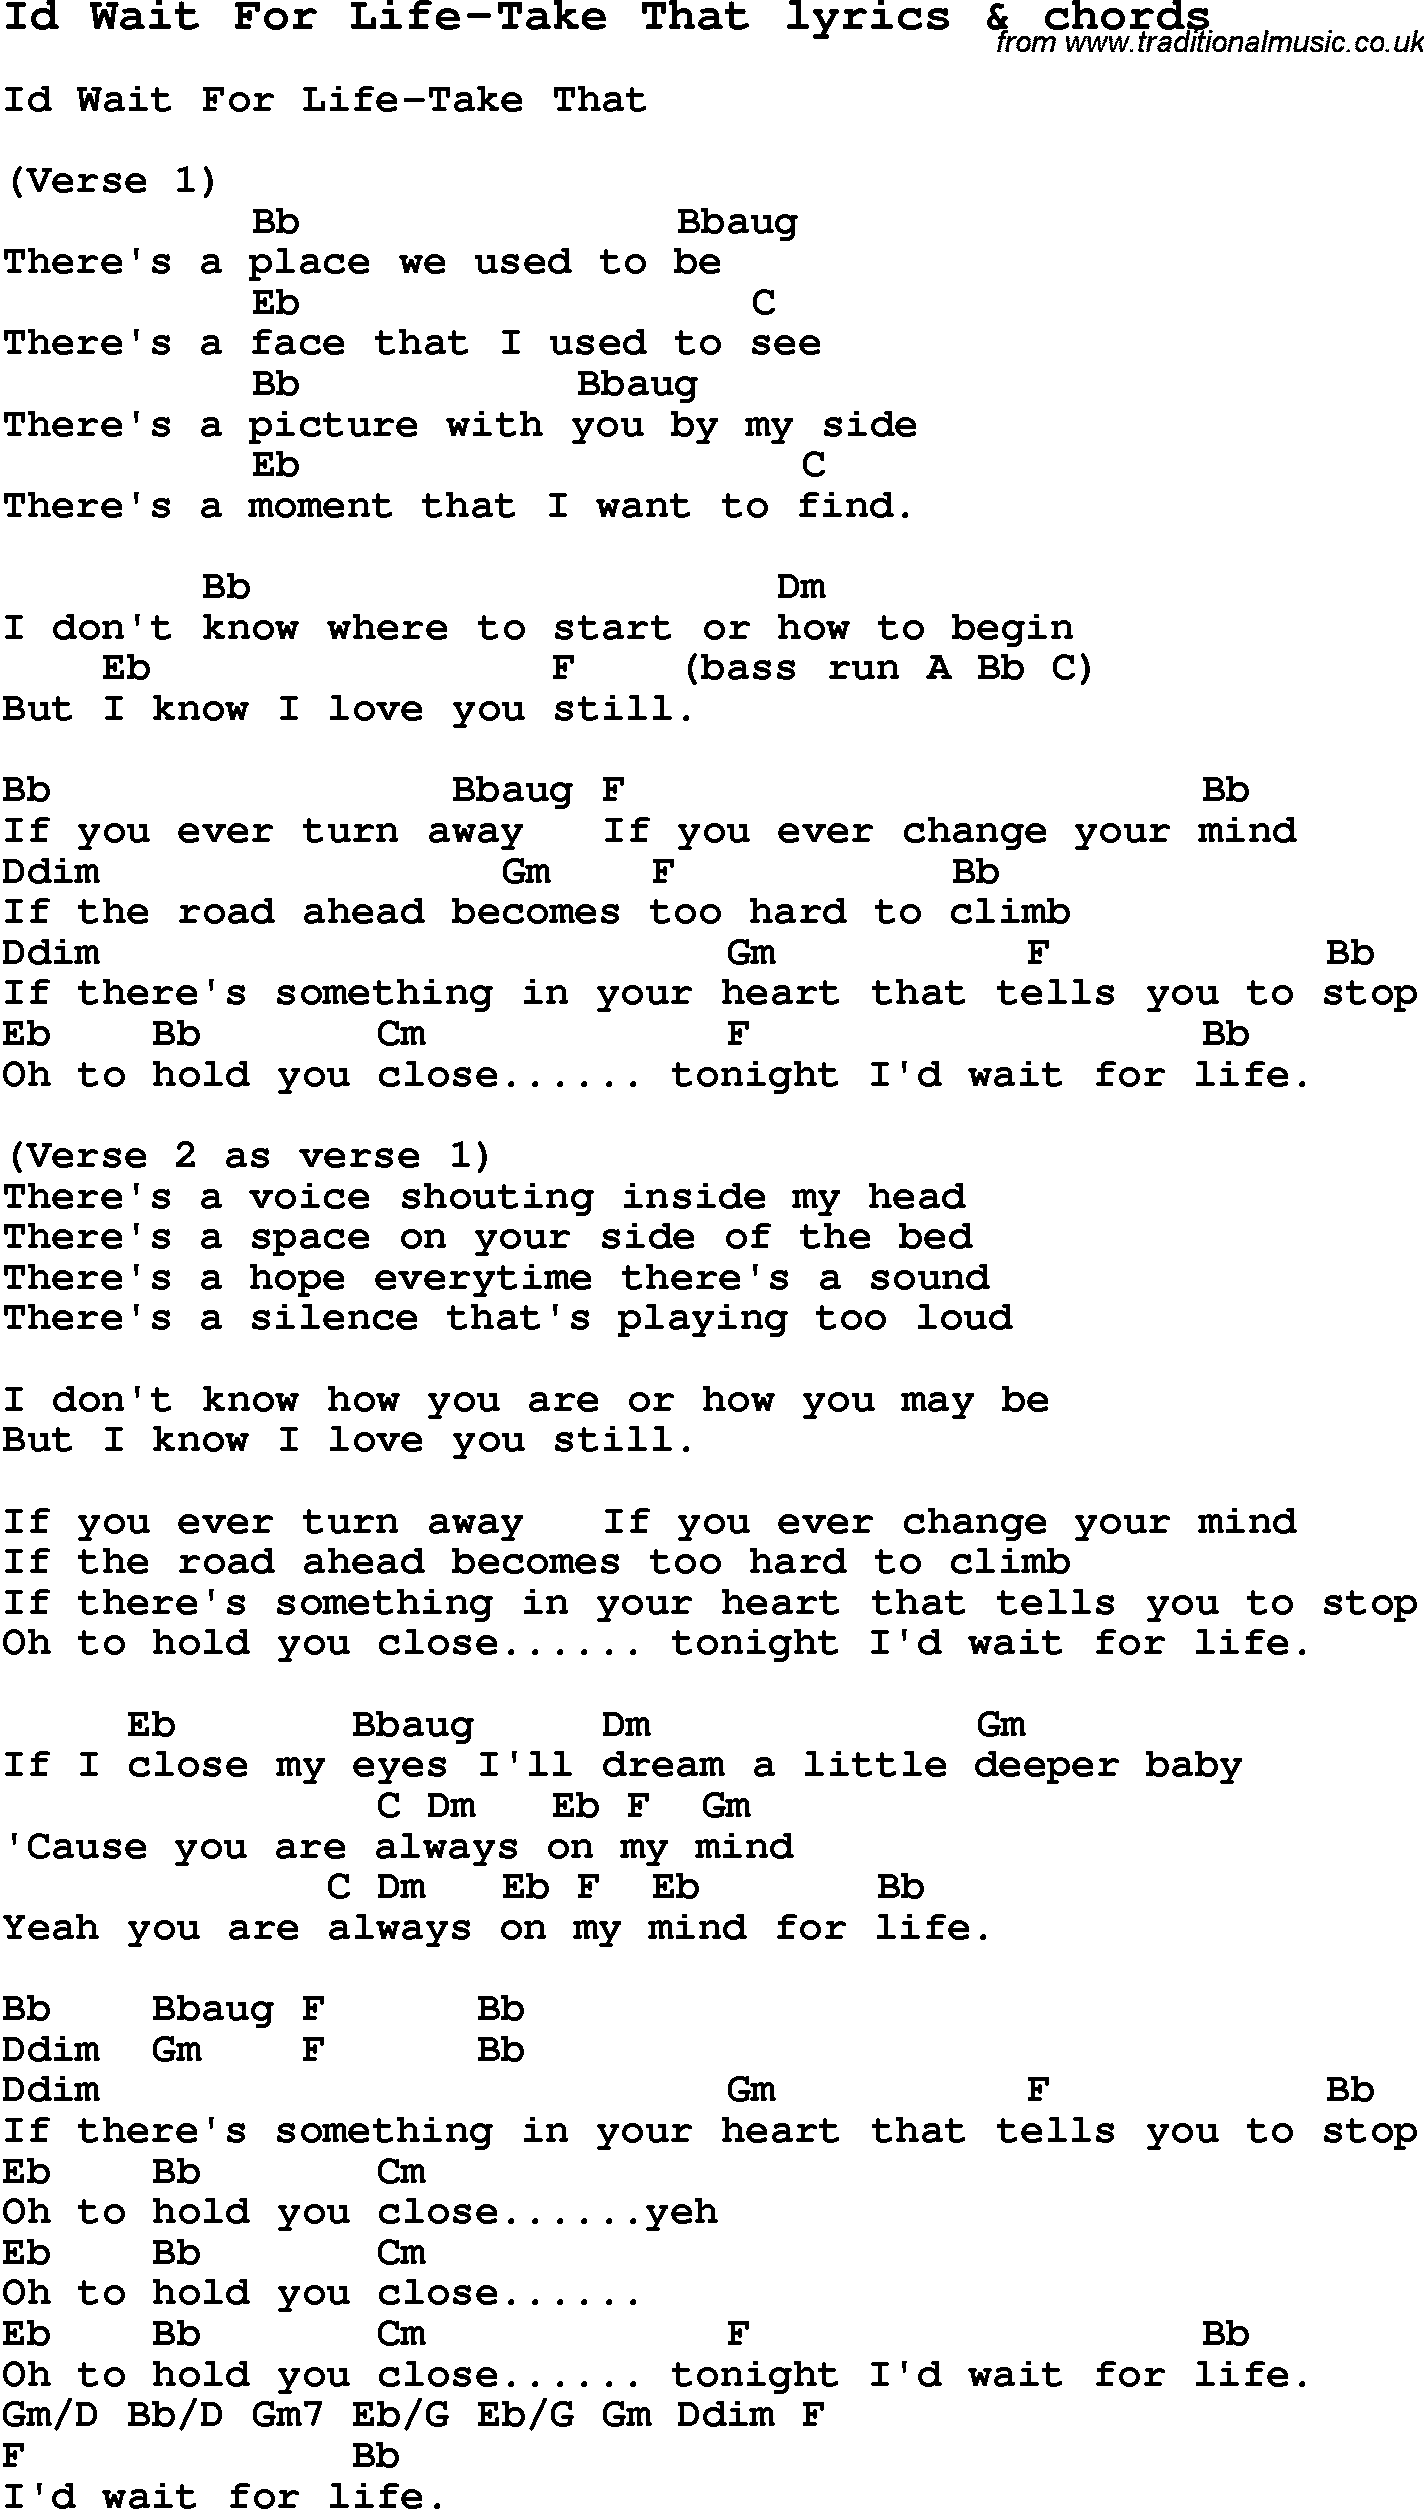 Love Song Lyrics for: Id Wait For Life-Take That with chords for Ukulele, Guitar Banjo etc.